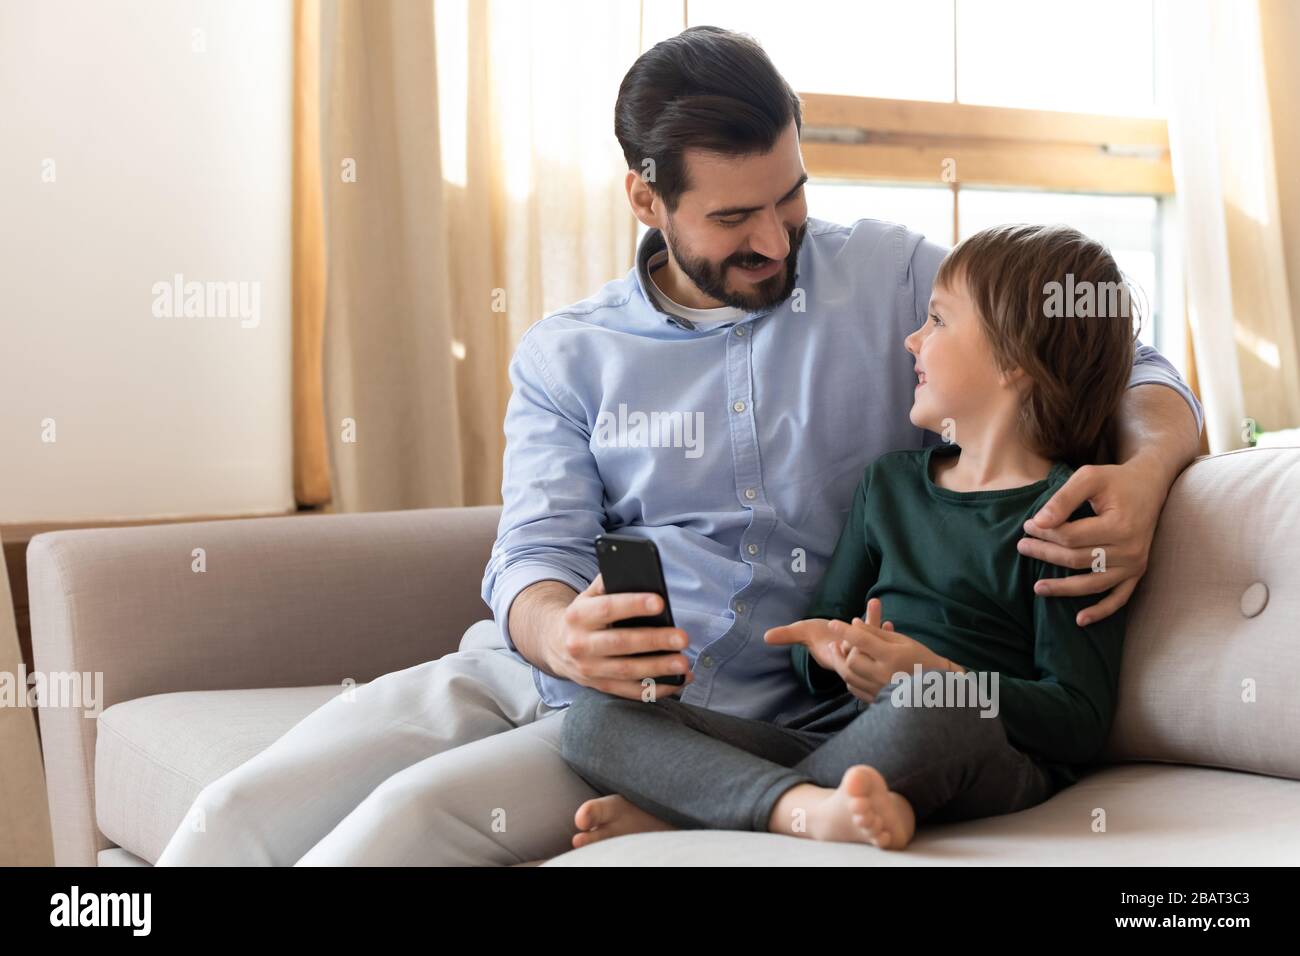 Happy dad cuddling small child son, showing funny mobile app. Stock Photo